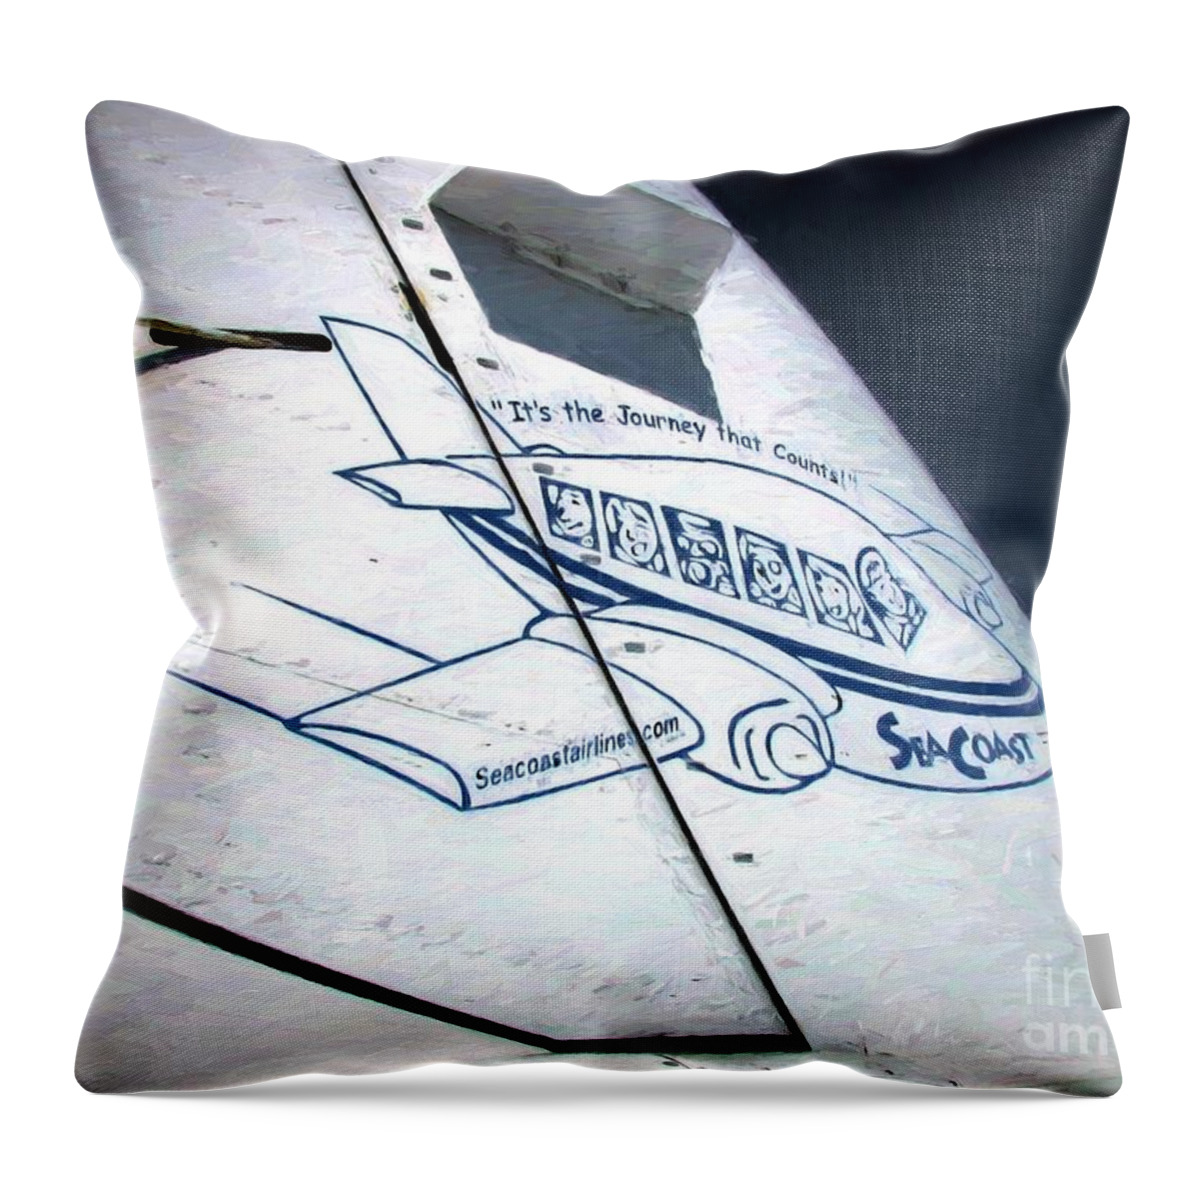 Airplane Throw Pillow featuring the photograph Seacoast Airlines by Peggy Hughes